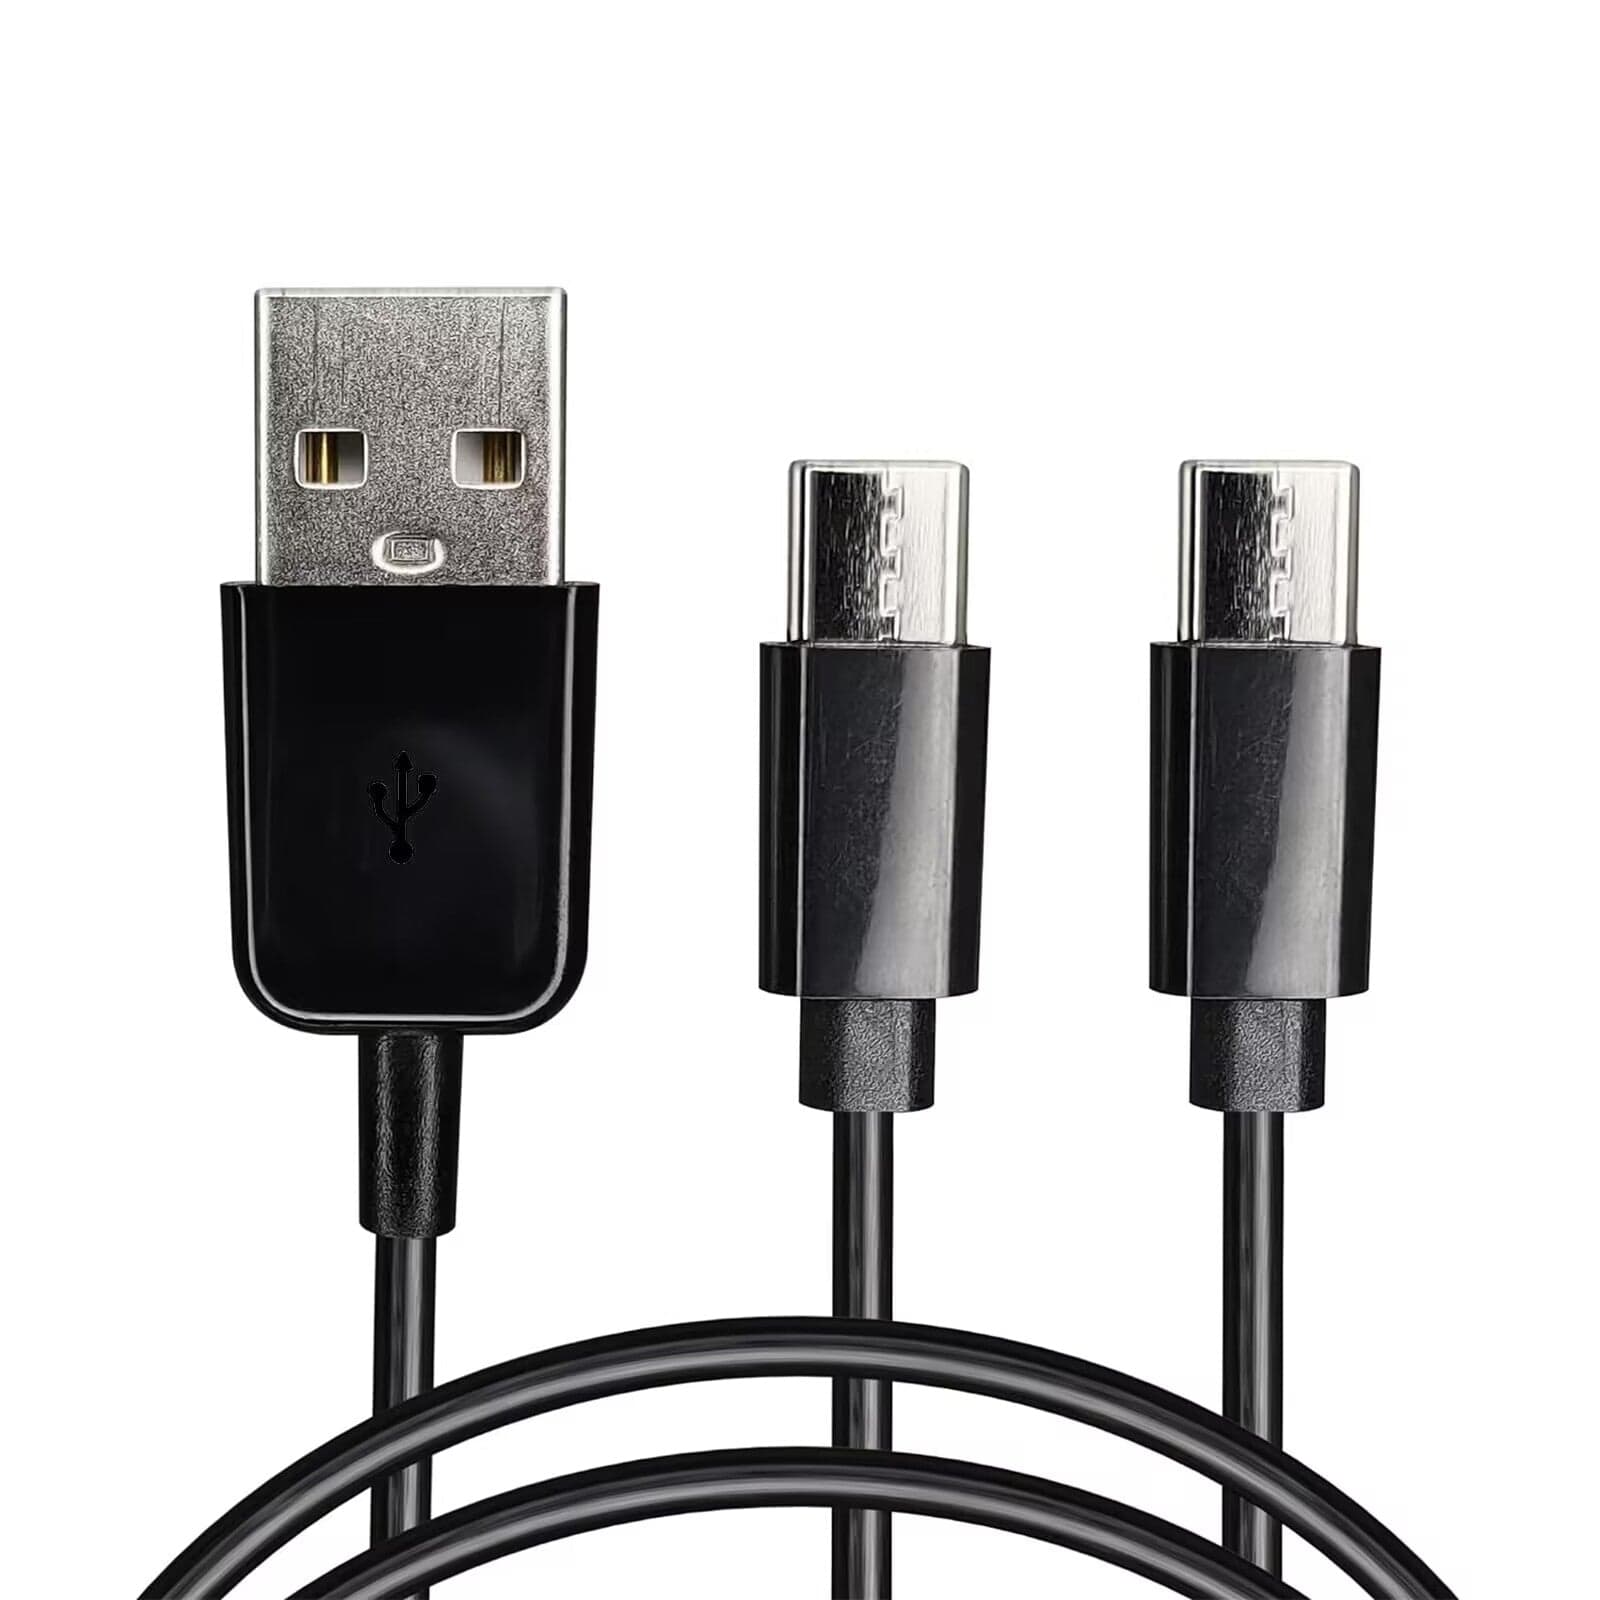 WinBridge 2-in-1 USB Type C Charging Cable for M801, S96, S98, WB002, WB002Plus, WB003, T7, T8 etc